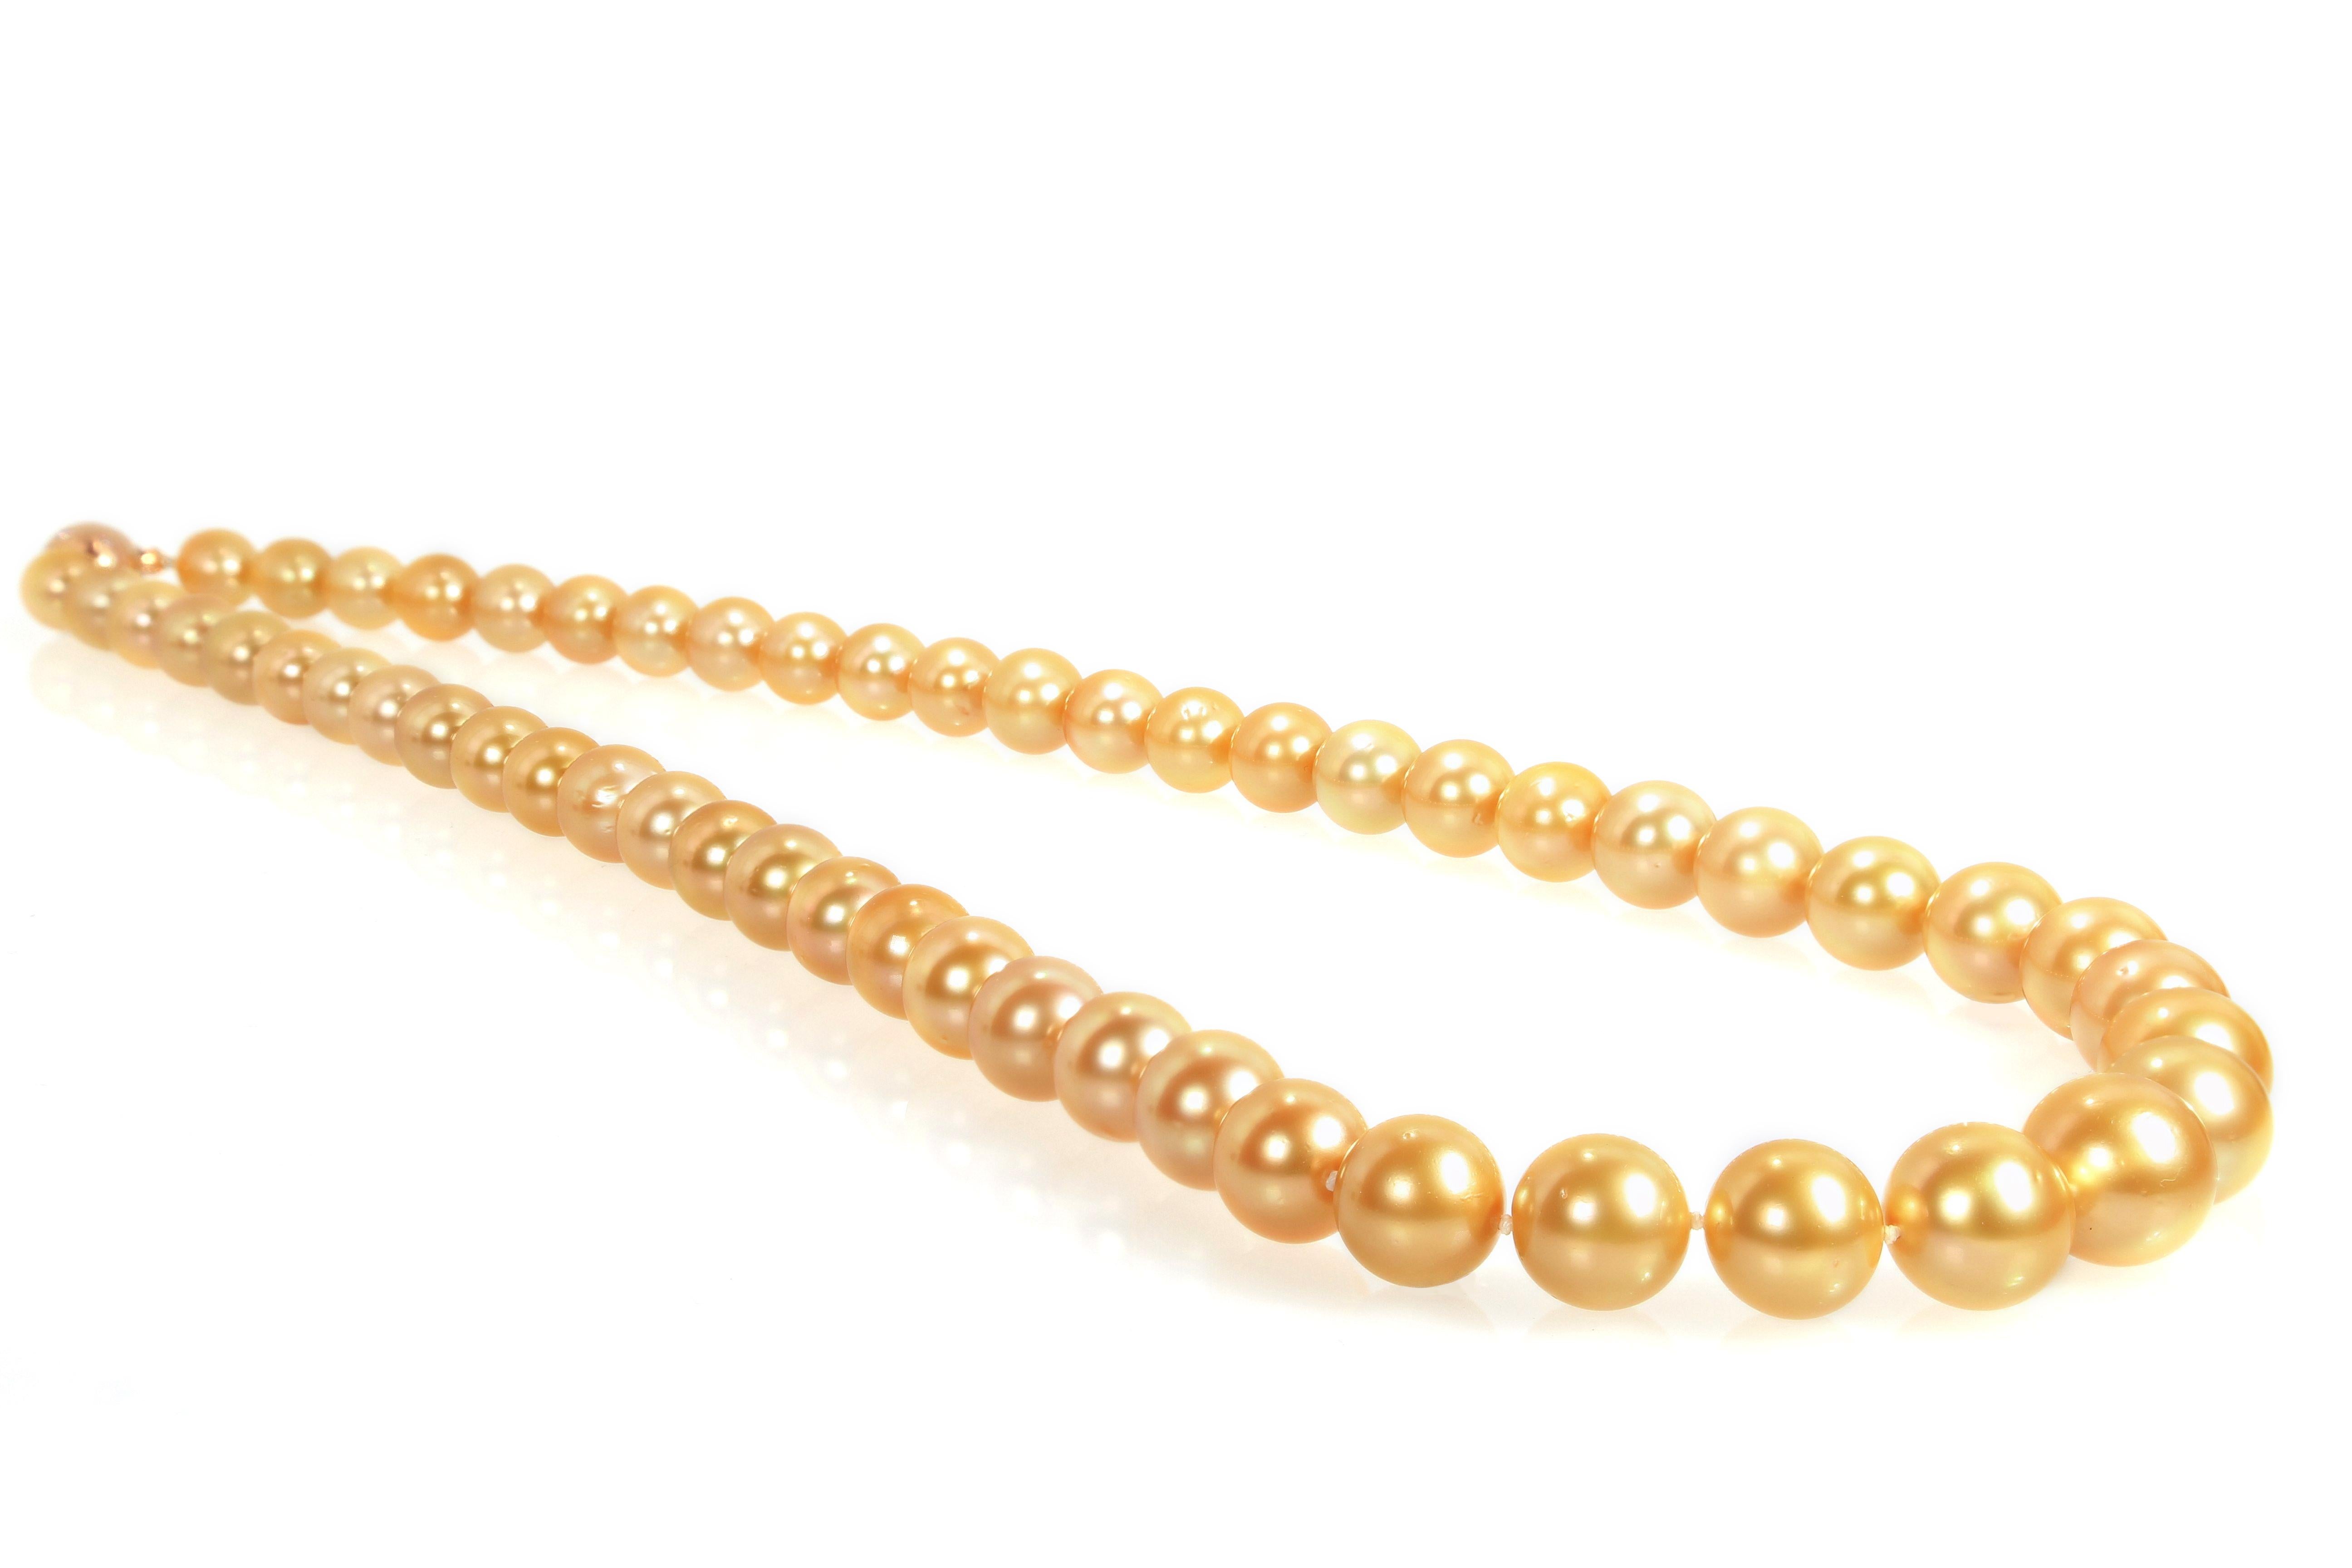 Brilliant Cut Golden South Sea Pearl Necklace with 18K Gold Clasp with Diamonds For Sale